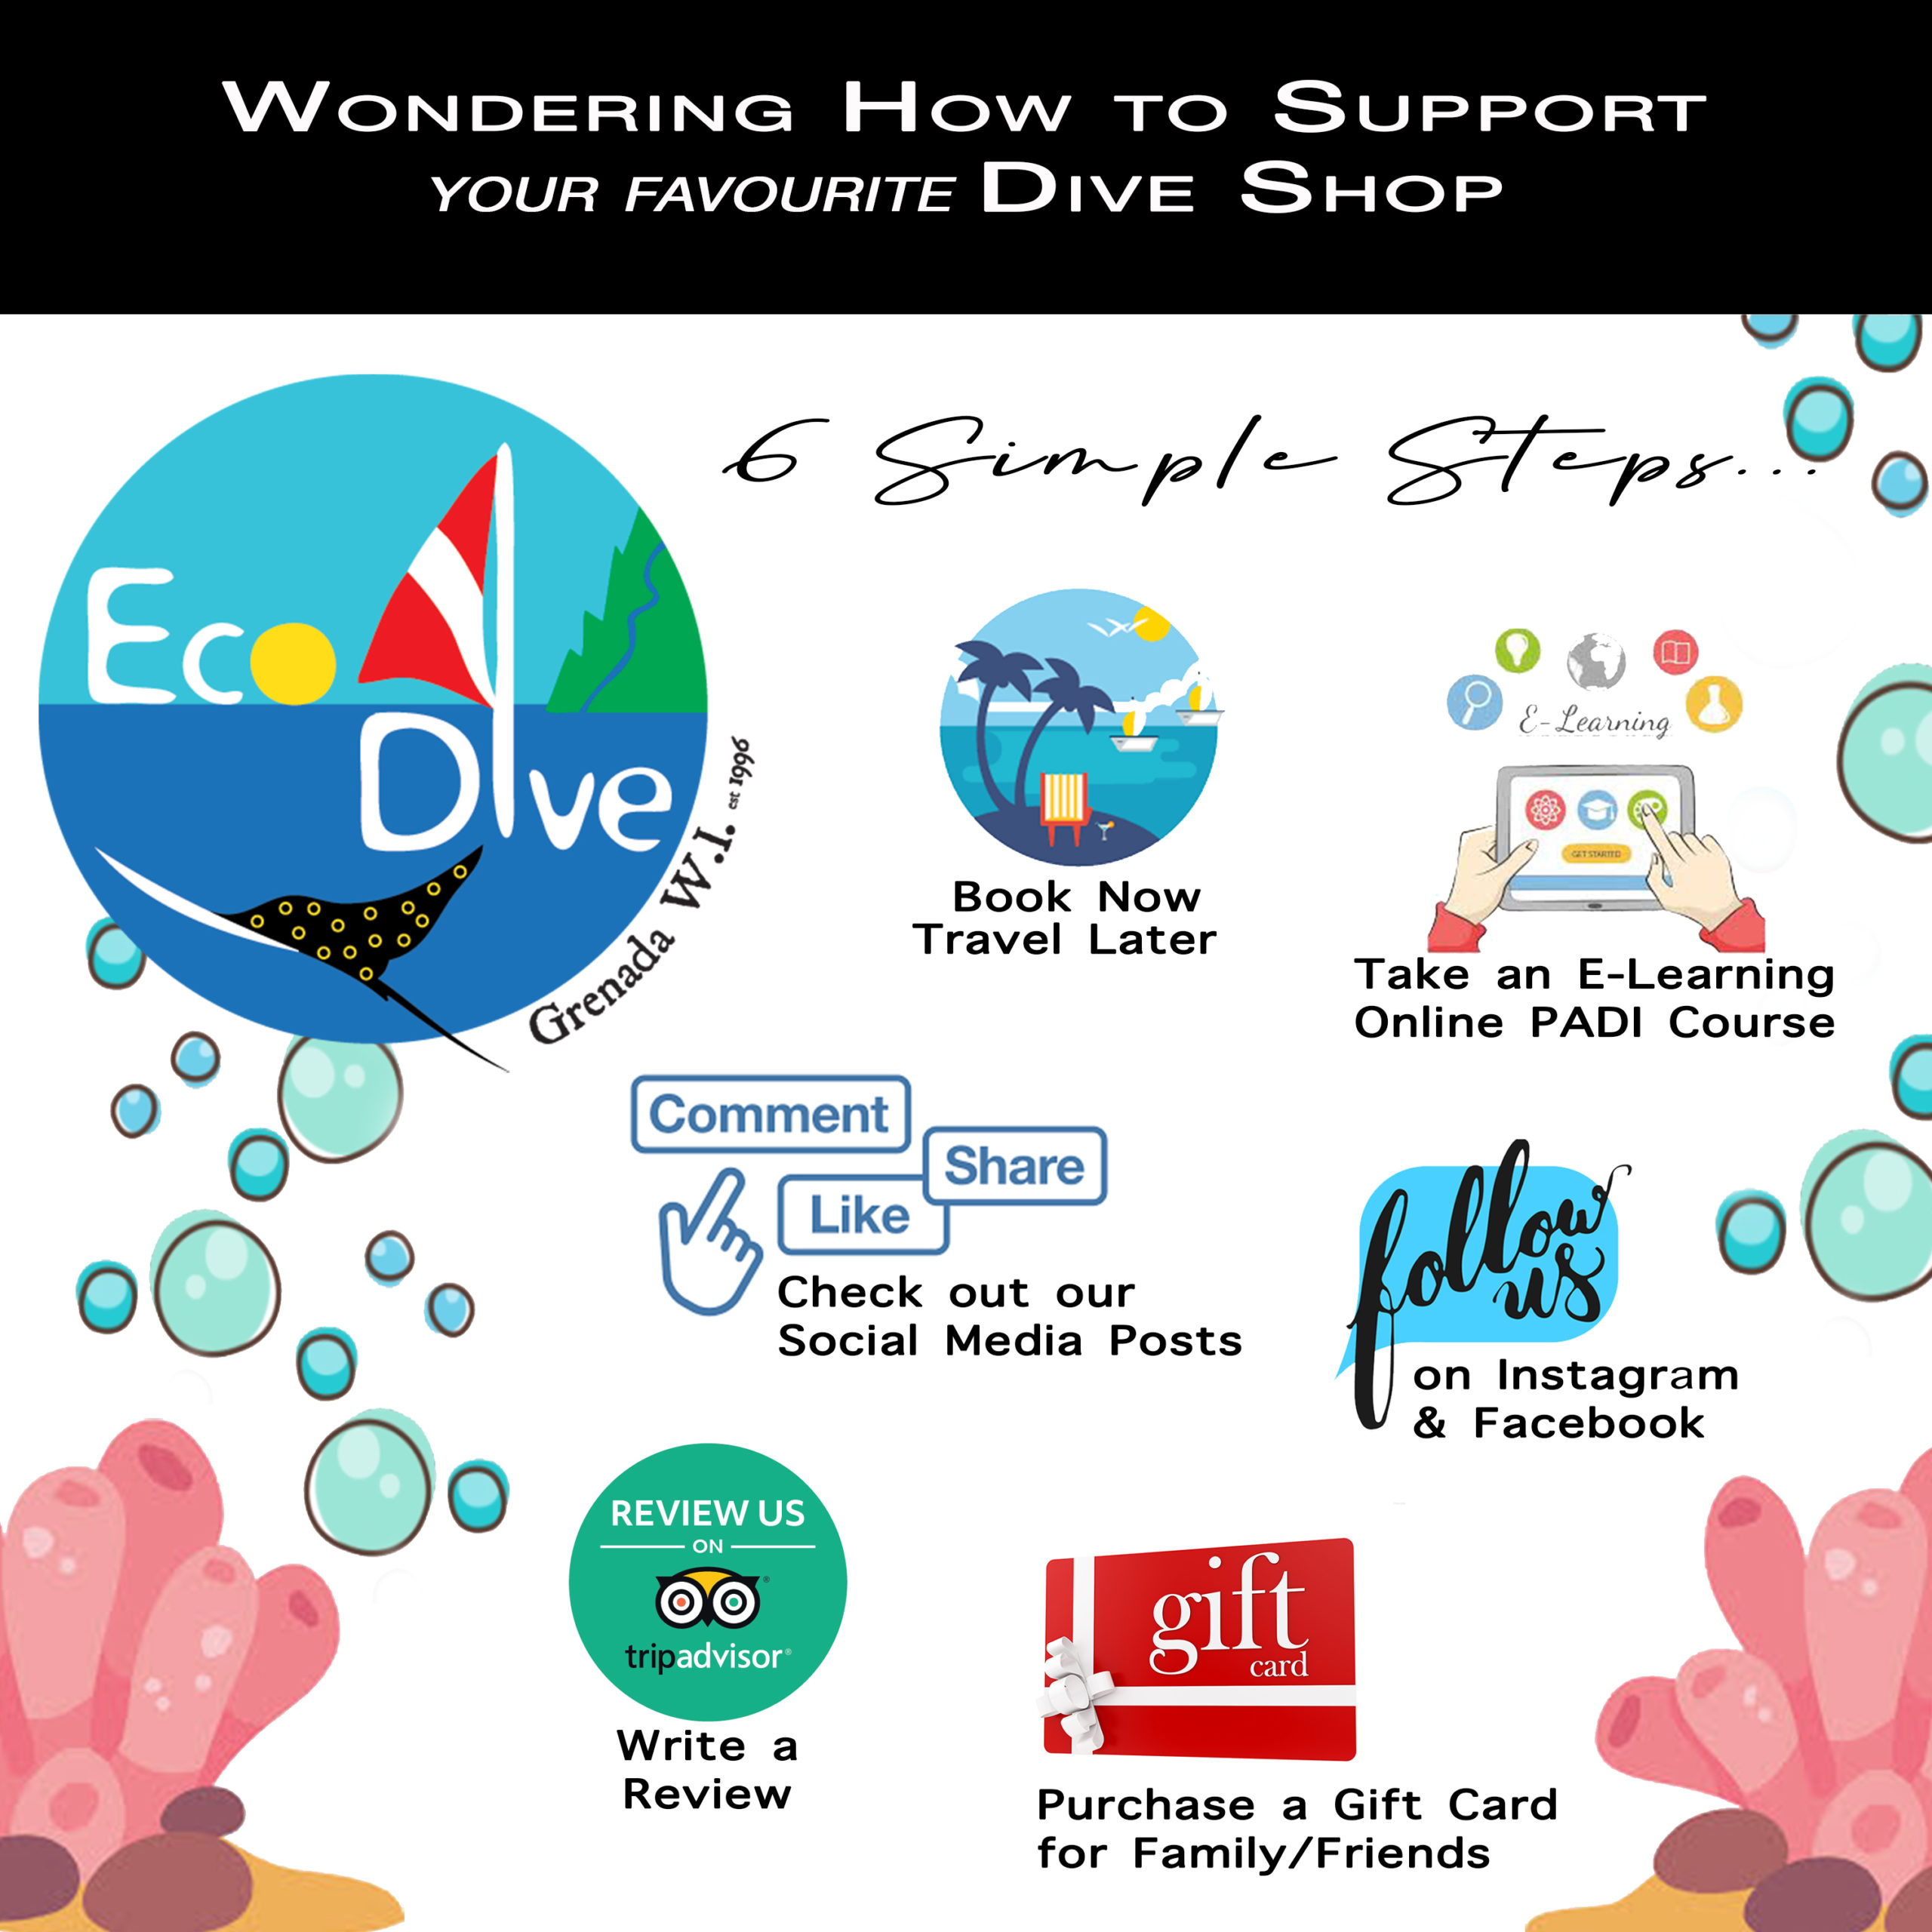 Eco dive in Grenada - how to support your favorite dive shop.